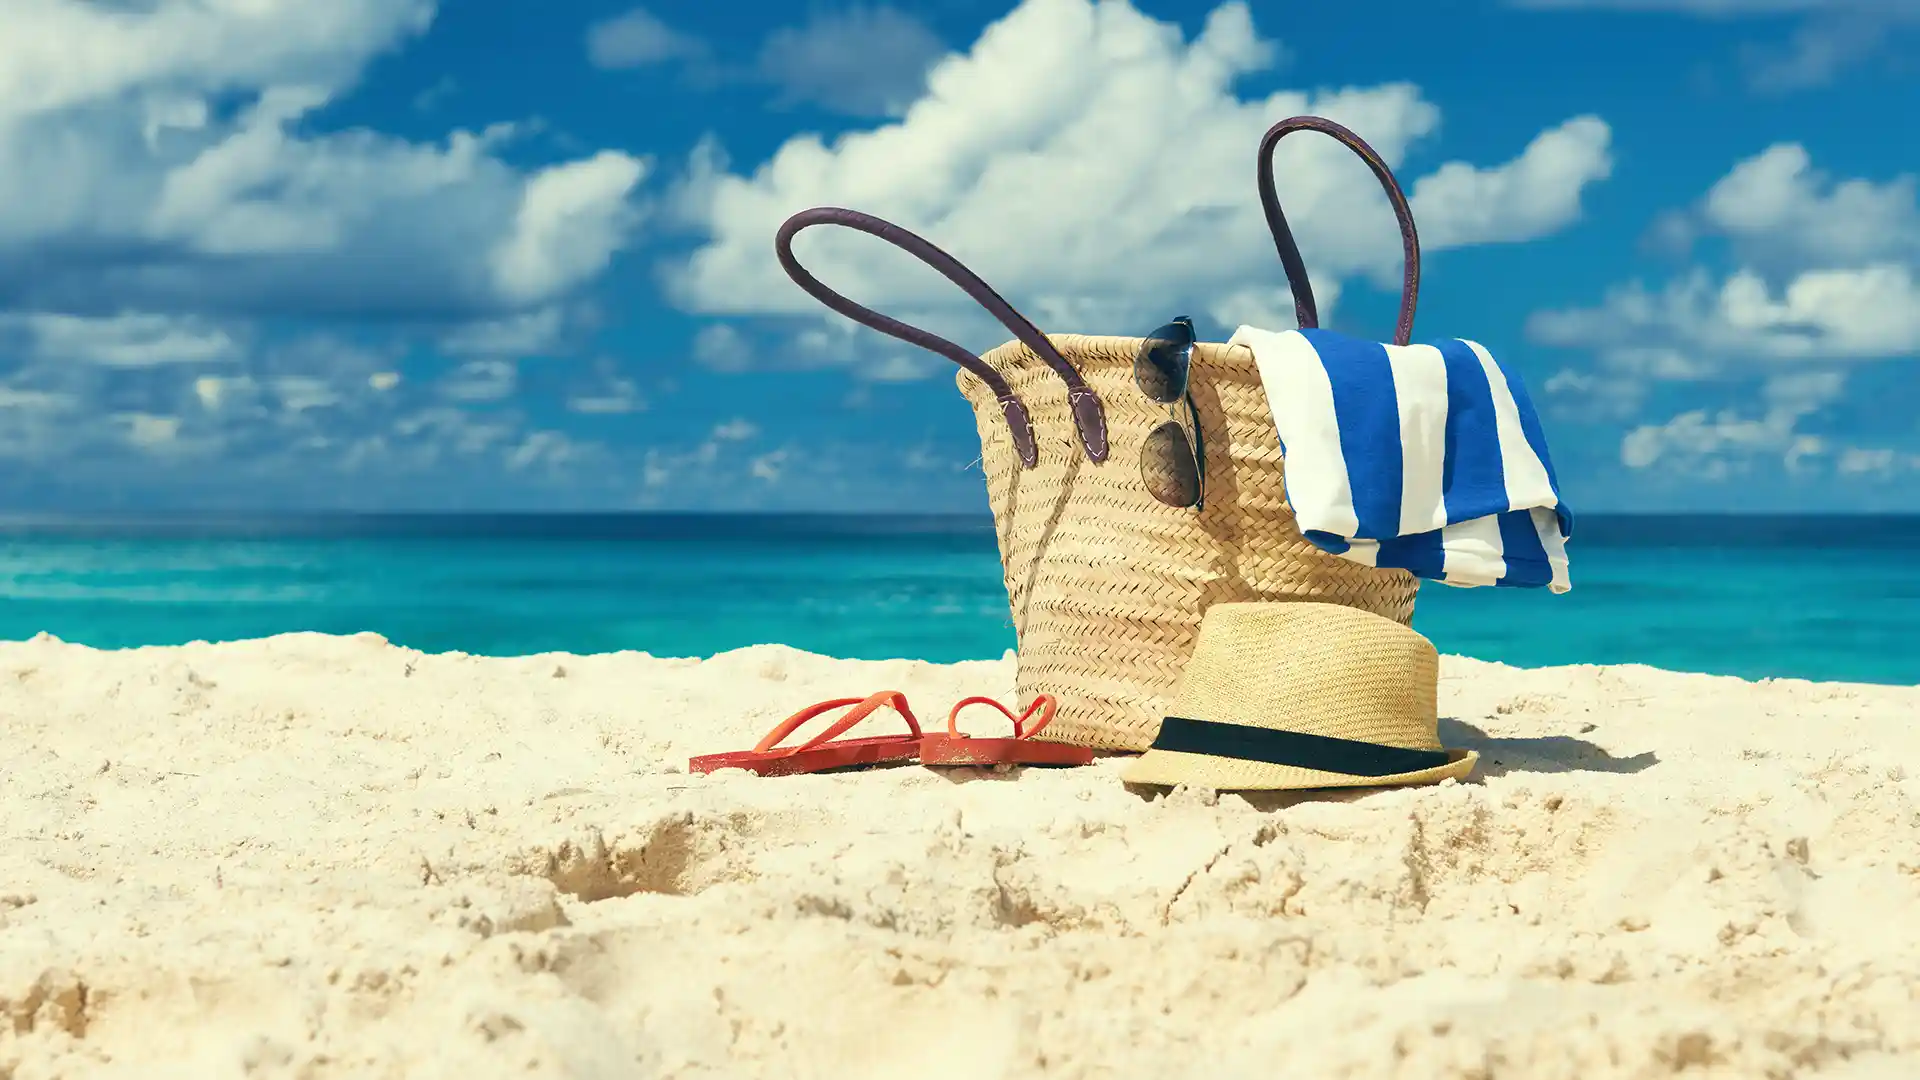 Beige carry-on bag in the sand with a hat and flip flops next to it and blue ocean water in the background.